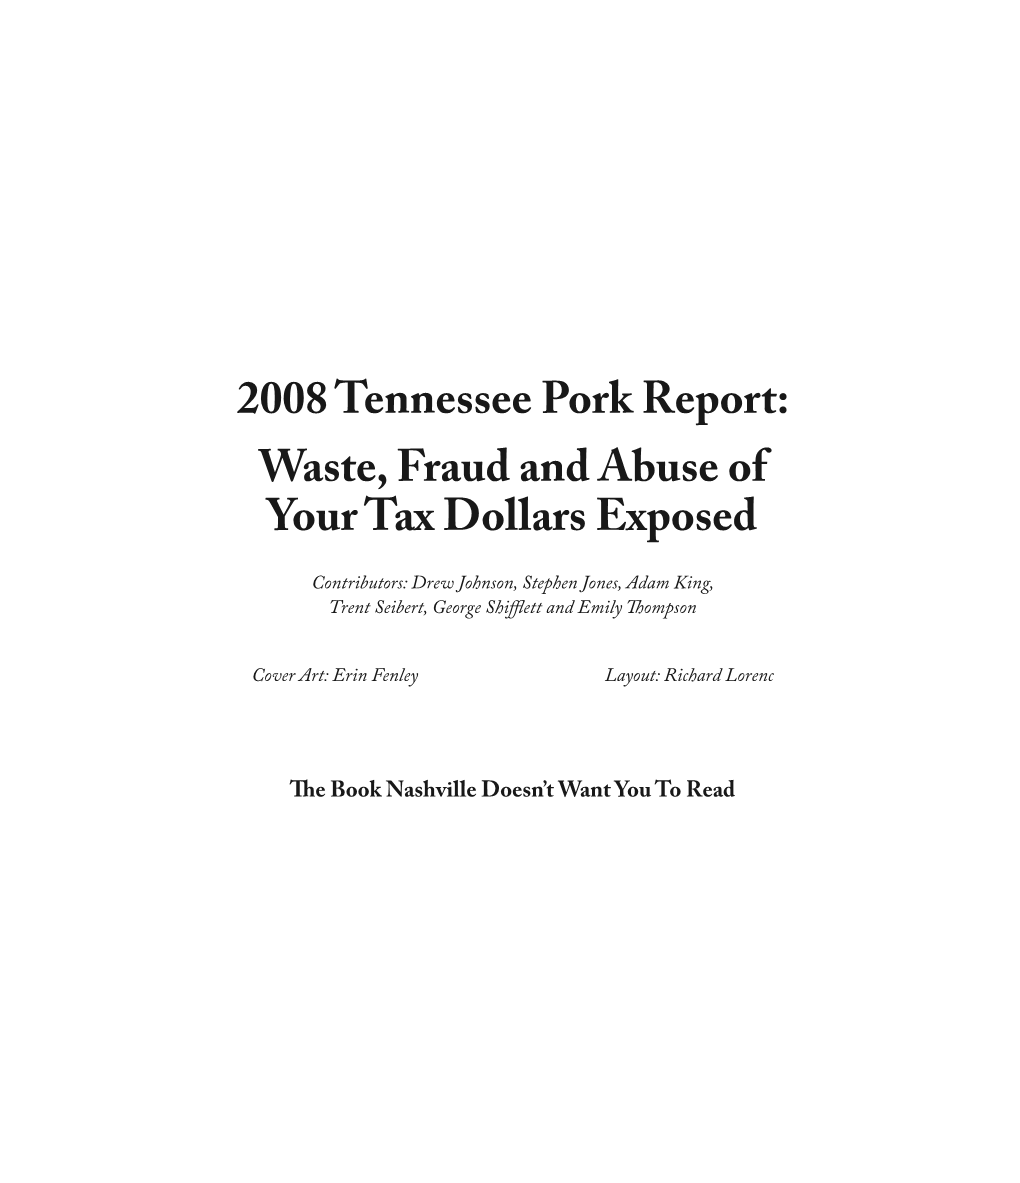 2008 Tennessee Pork Report: Waste, Fraud and Abuse of Your Tax Dollars Exposed